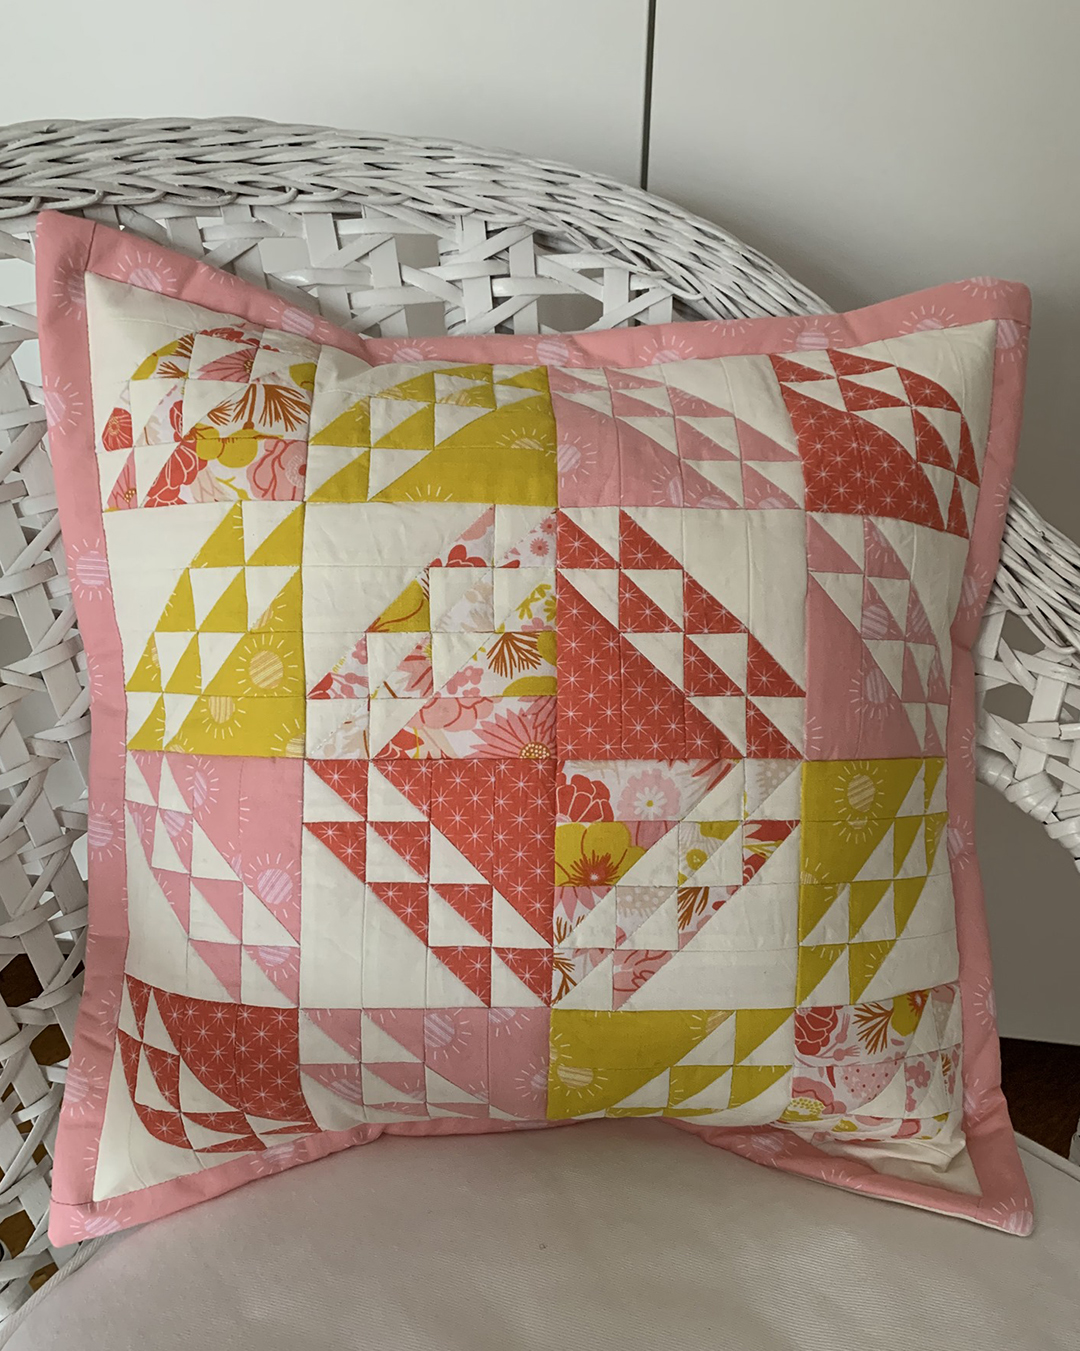 Spring Meadow - Spring Mini Quilt Pattern